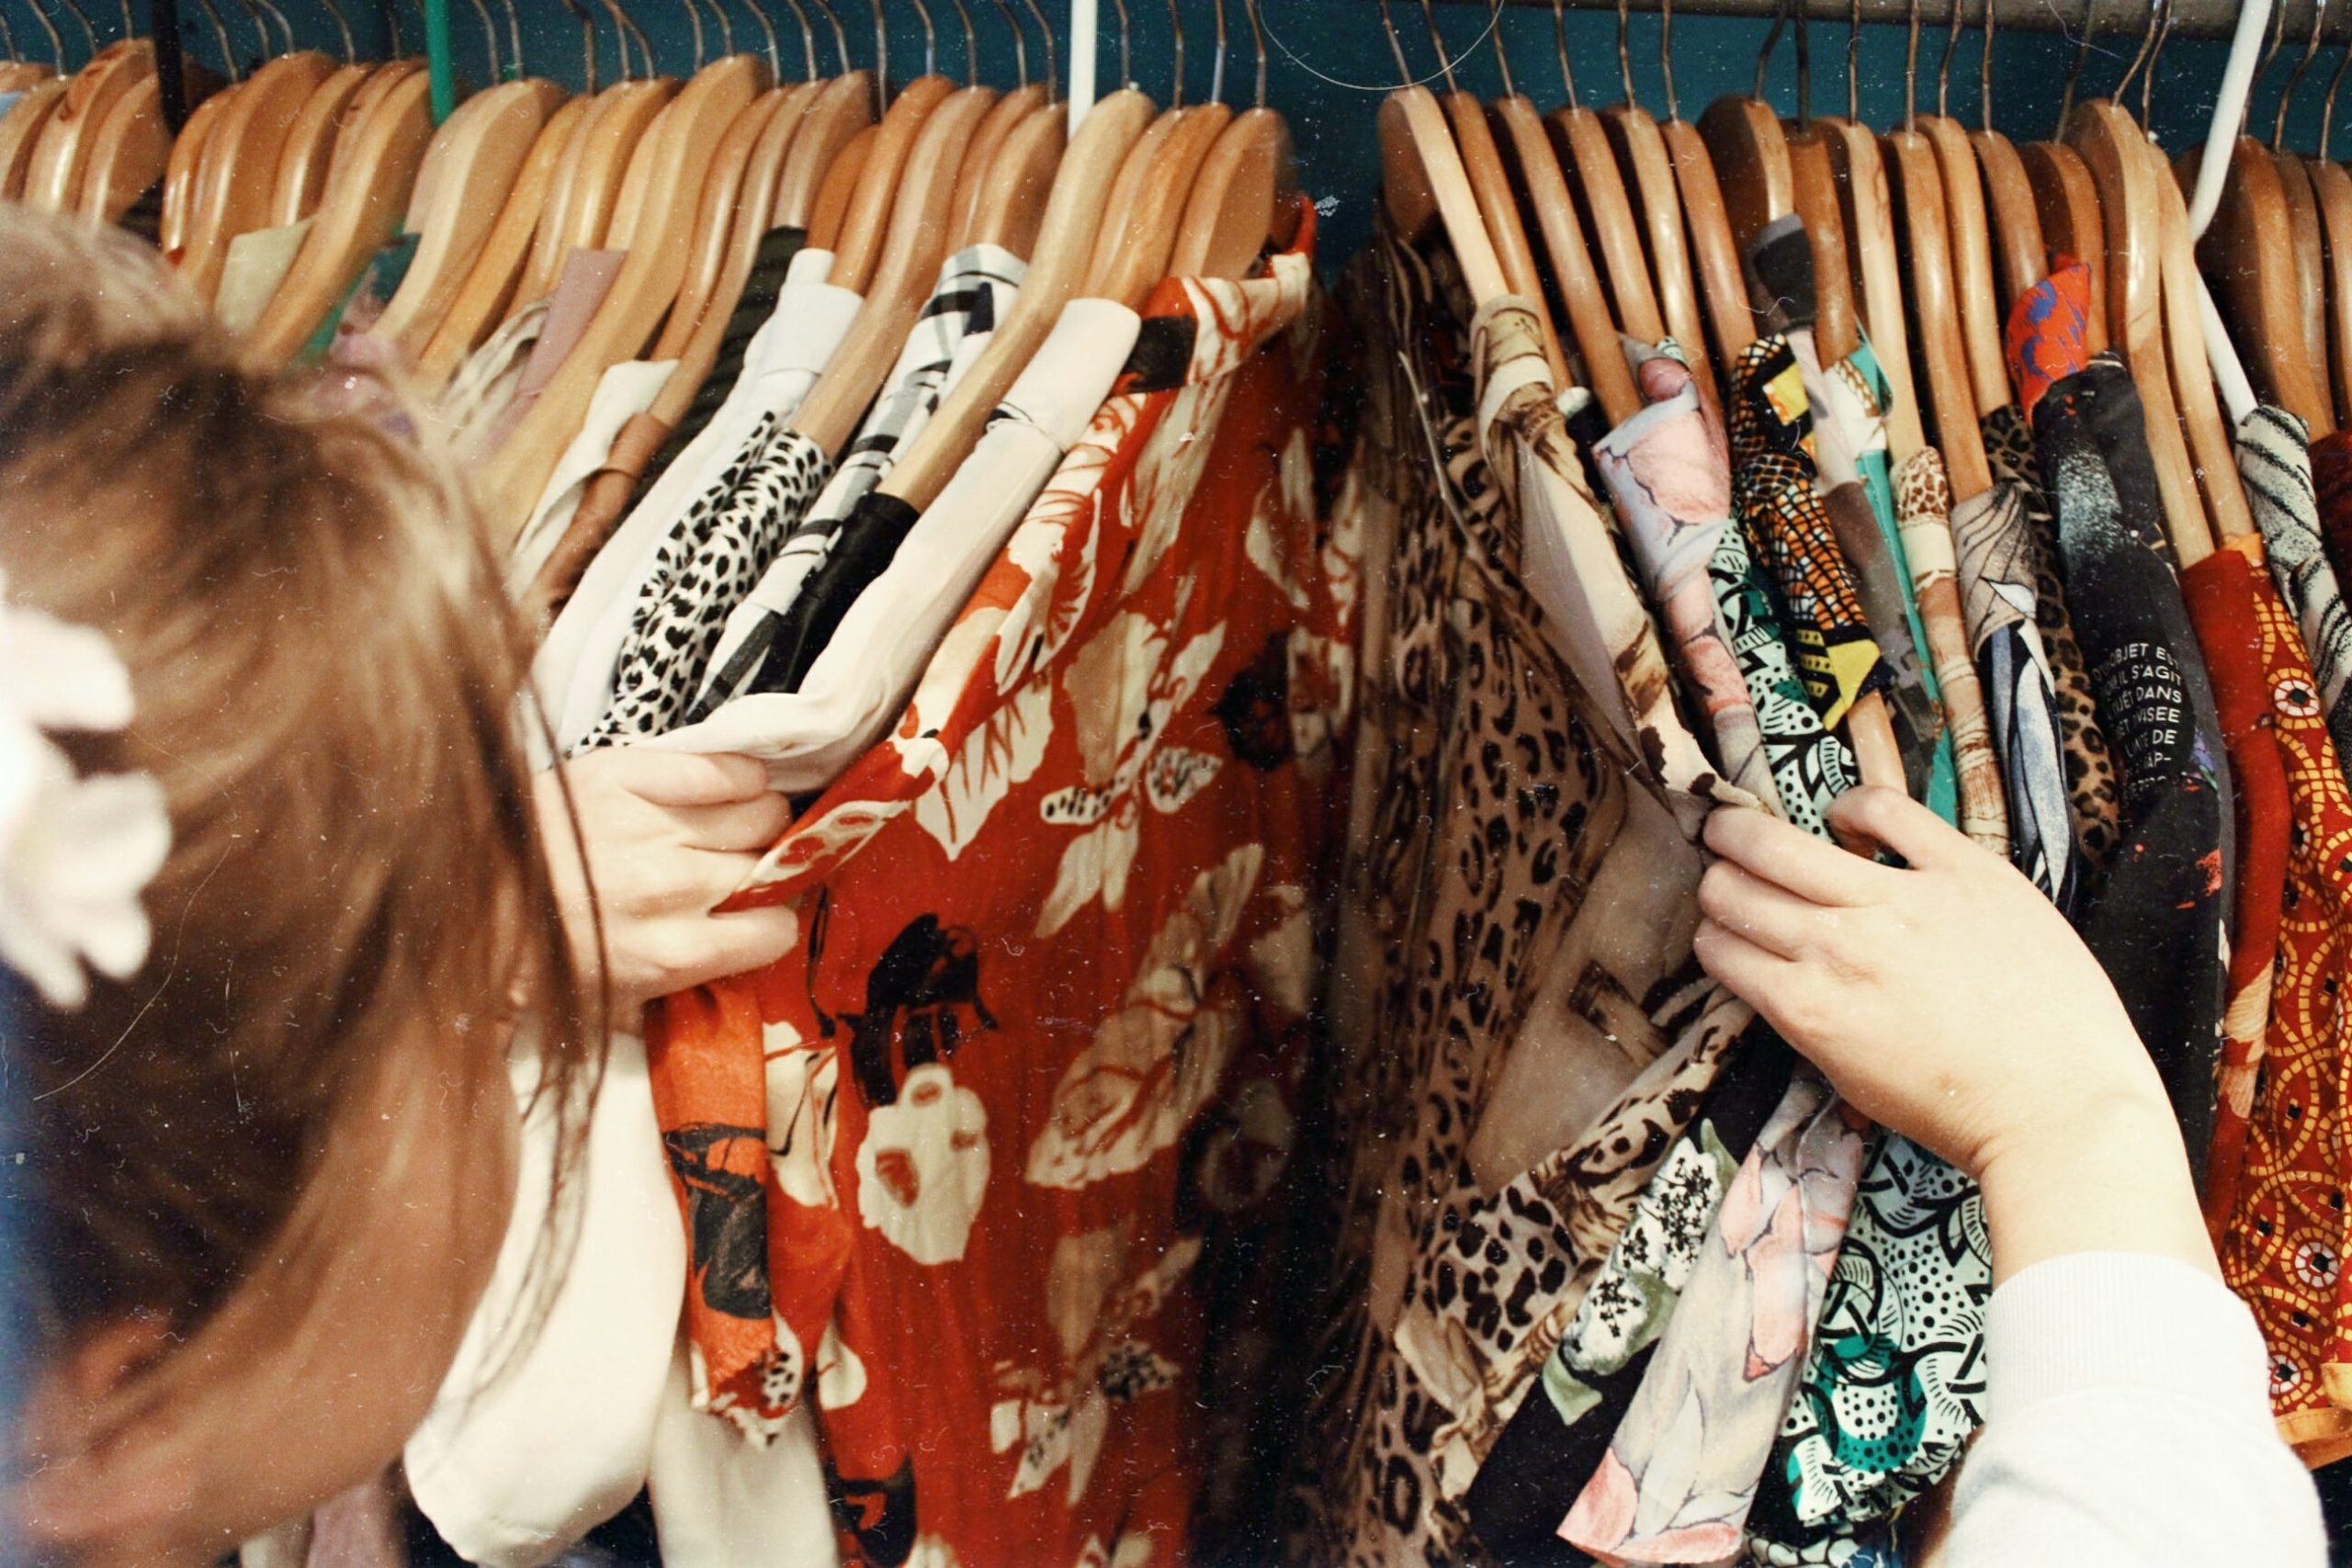 From Oxfam to “oh dayum!”: the rise of thrifting